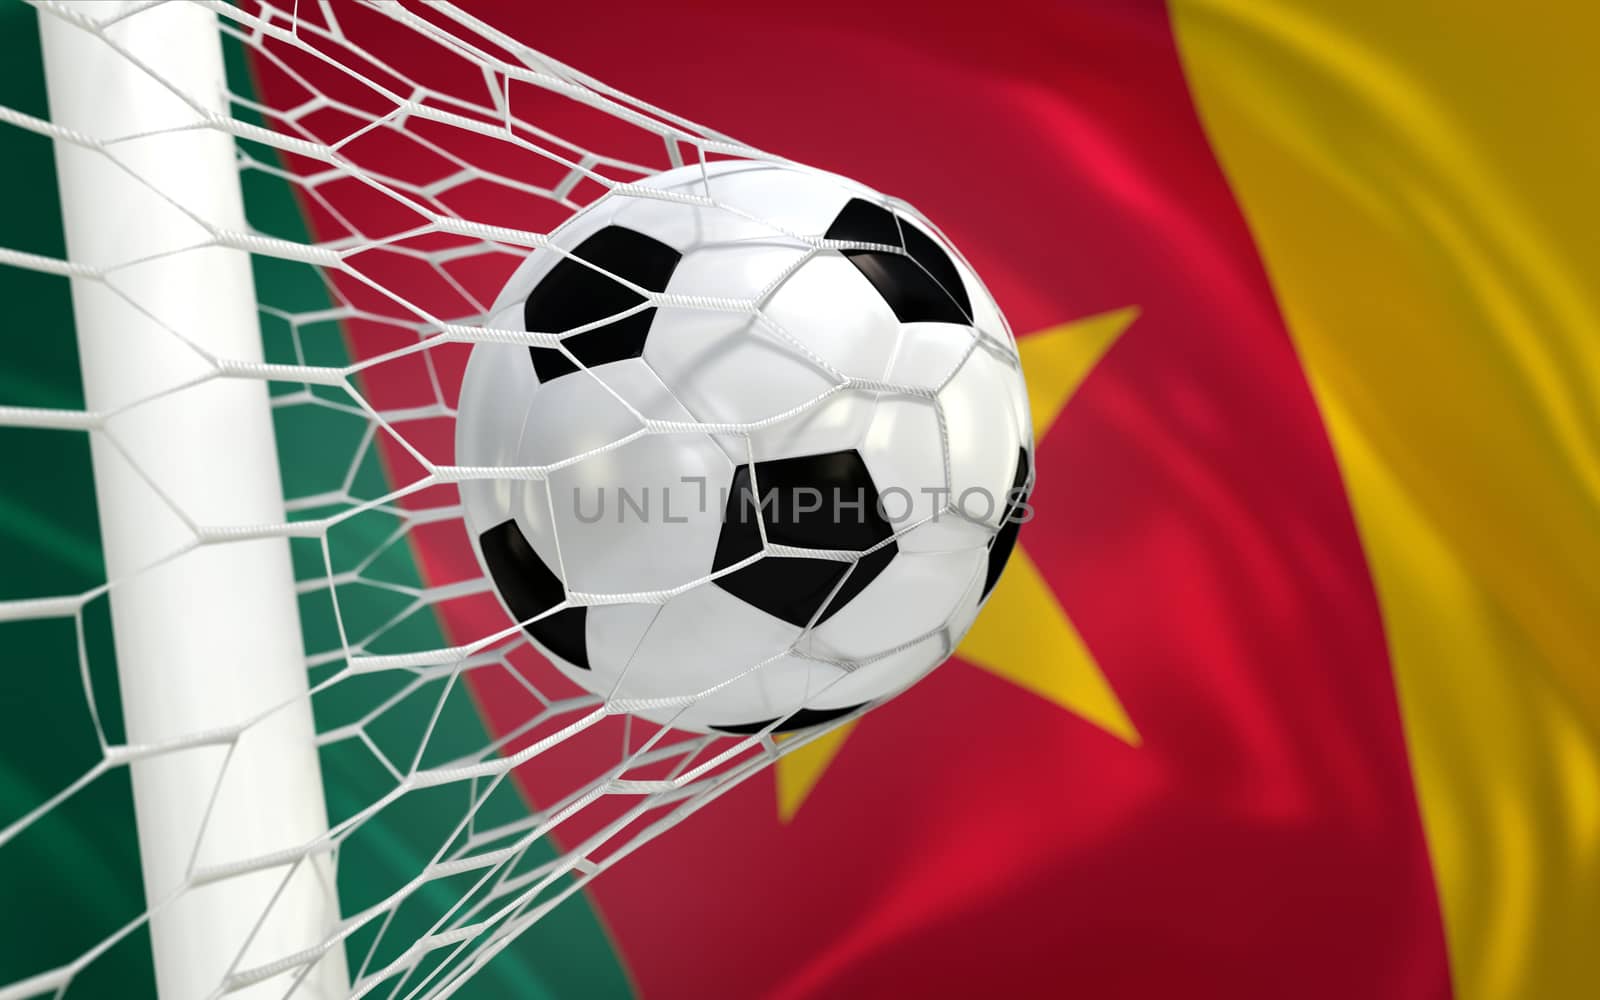 Cameroon waving flag and soccer ball in goal net by Barbraford